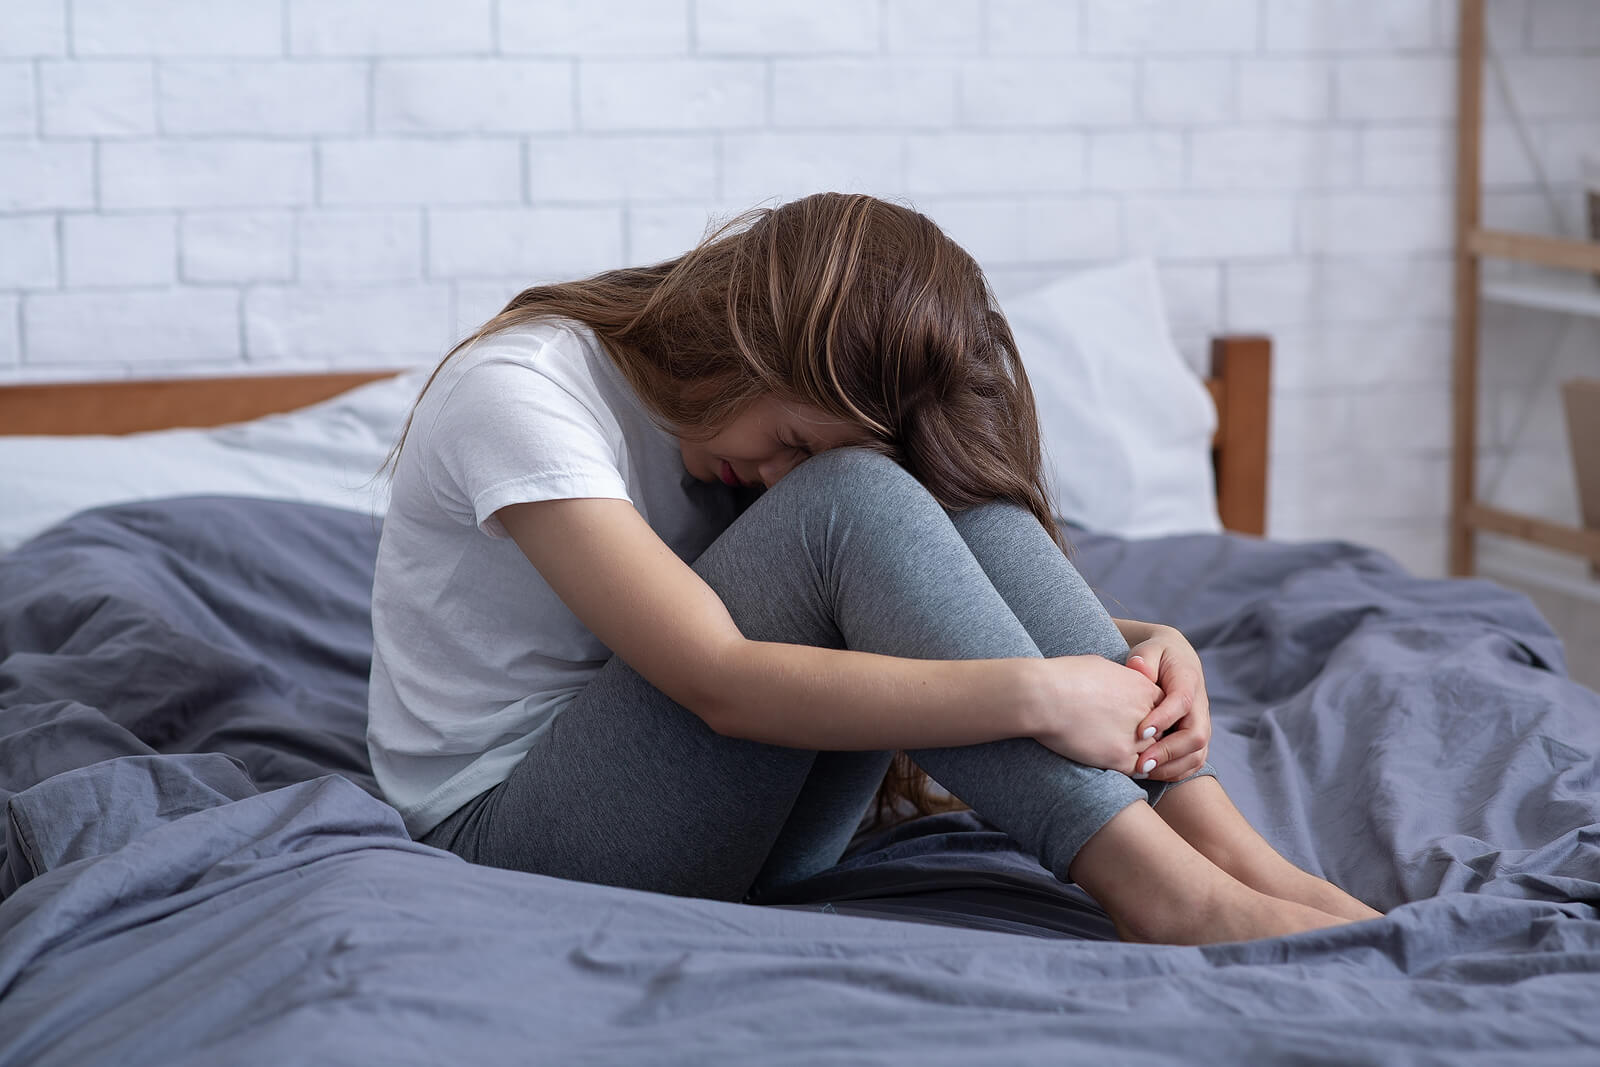 Image of a young adult sitting on a bed looking upset with can be a sign of depression in teens in Orlando, FL.